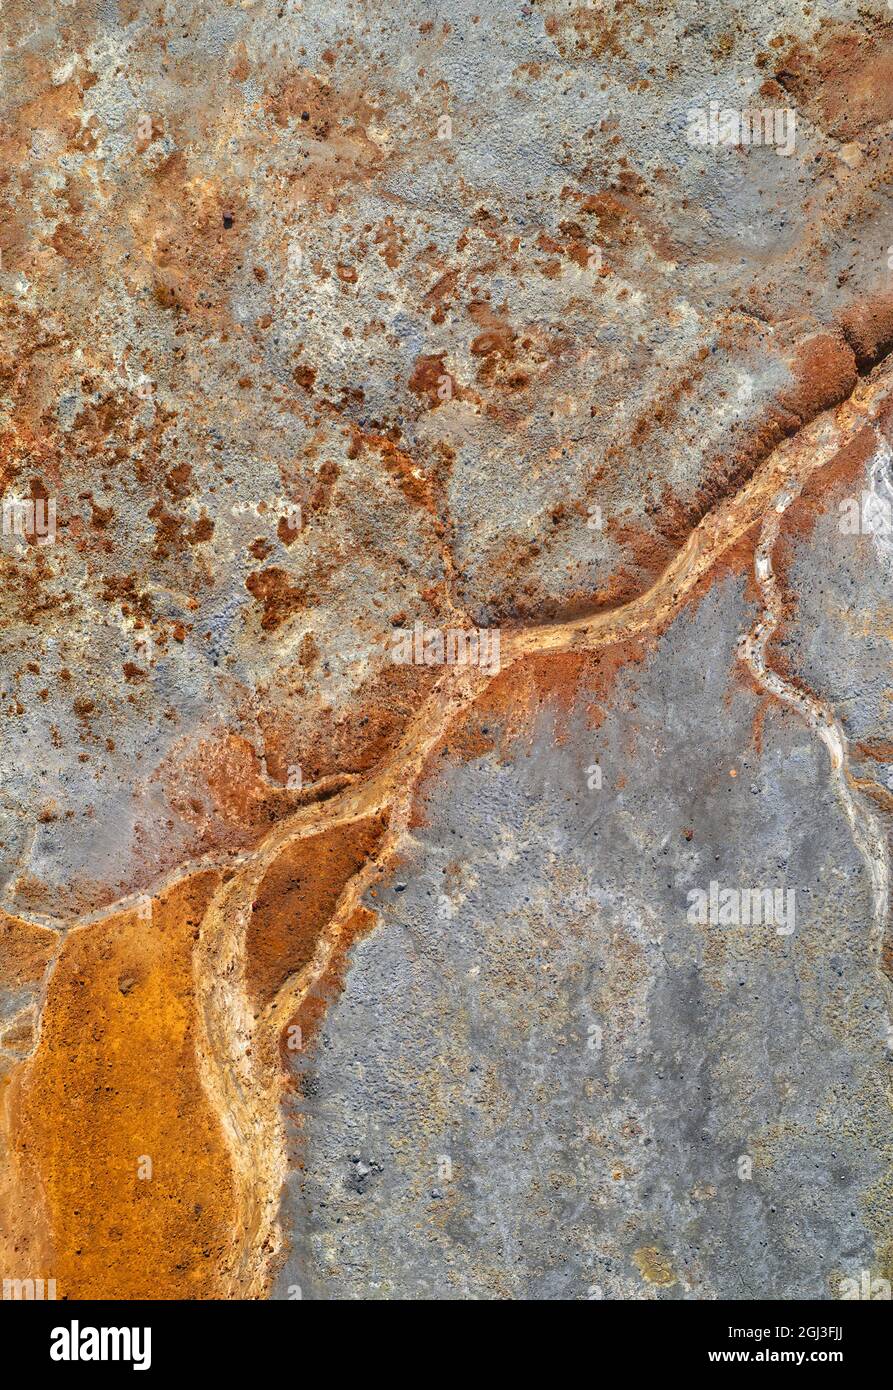 Dry rusty river bed over grey mine tailings, acid mine drainage vertical texture Stock Photo